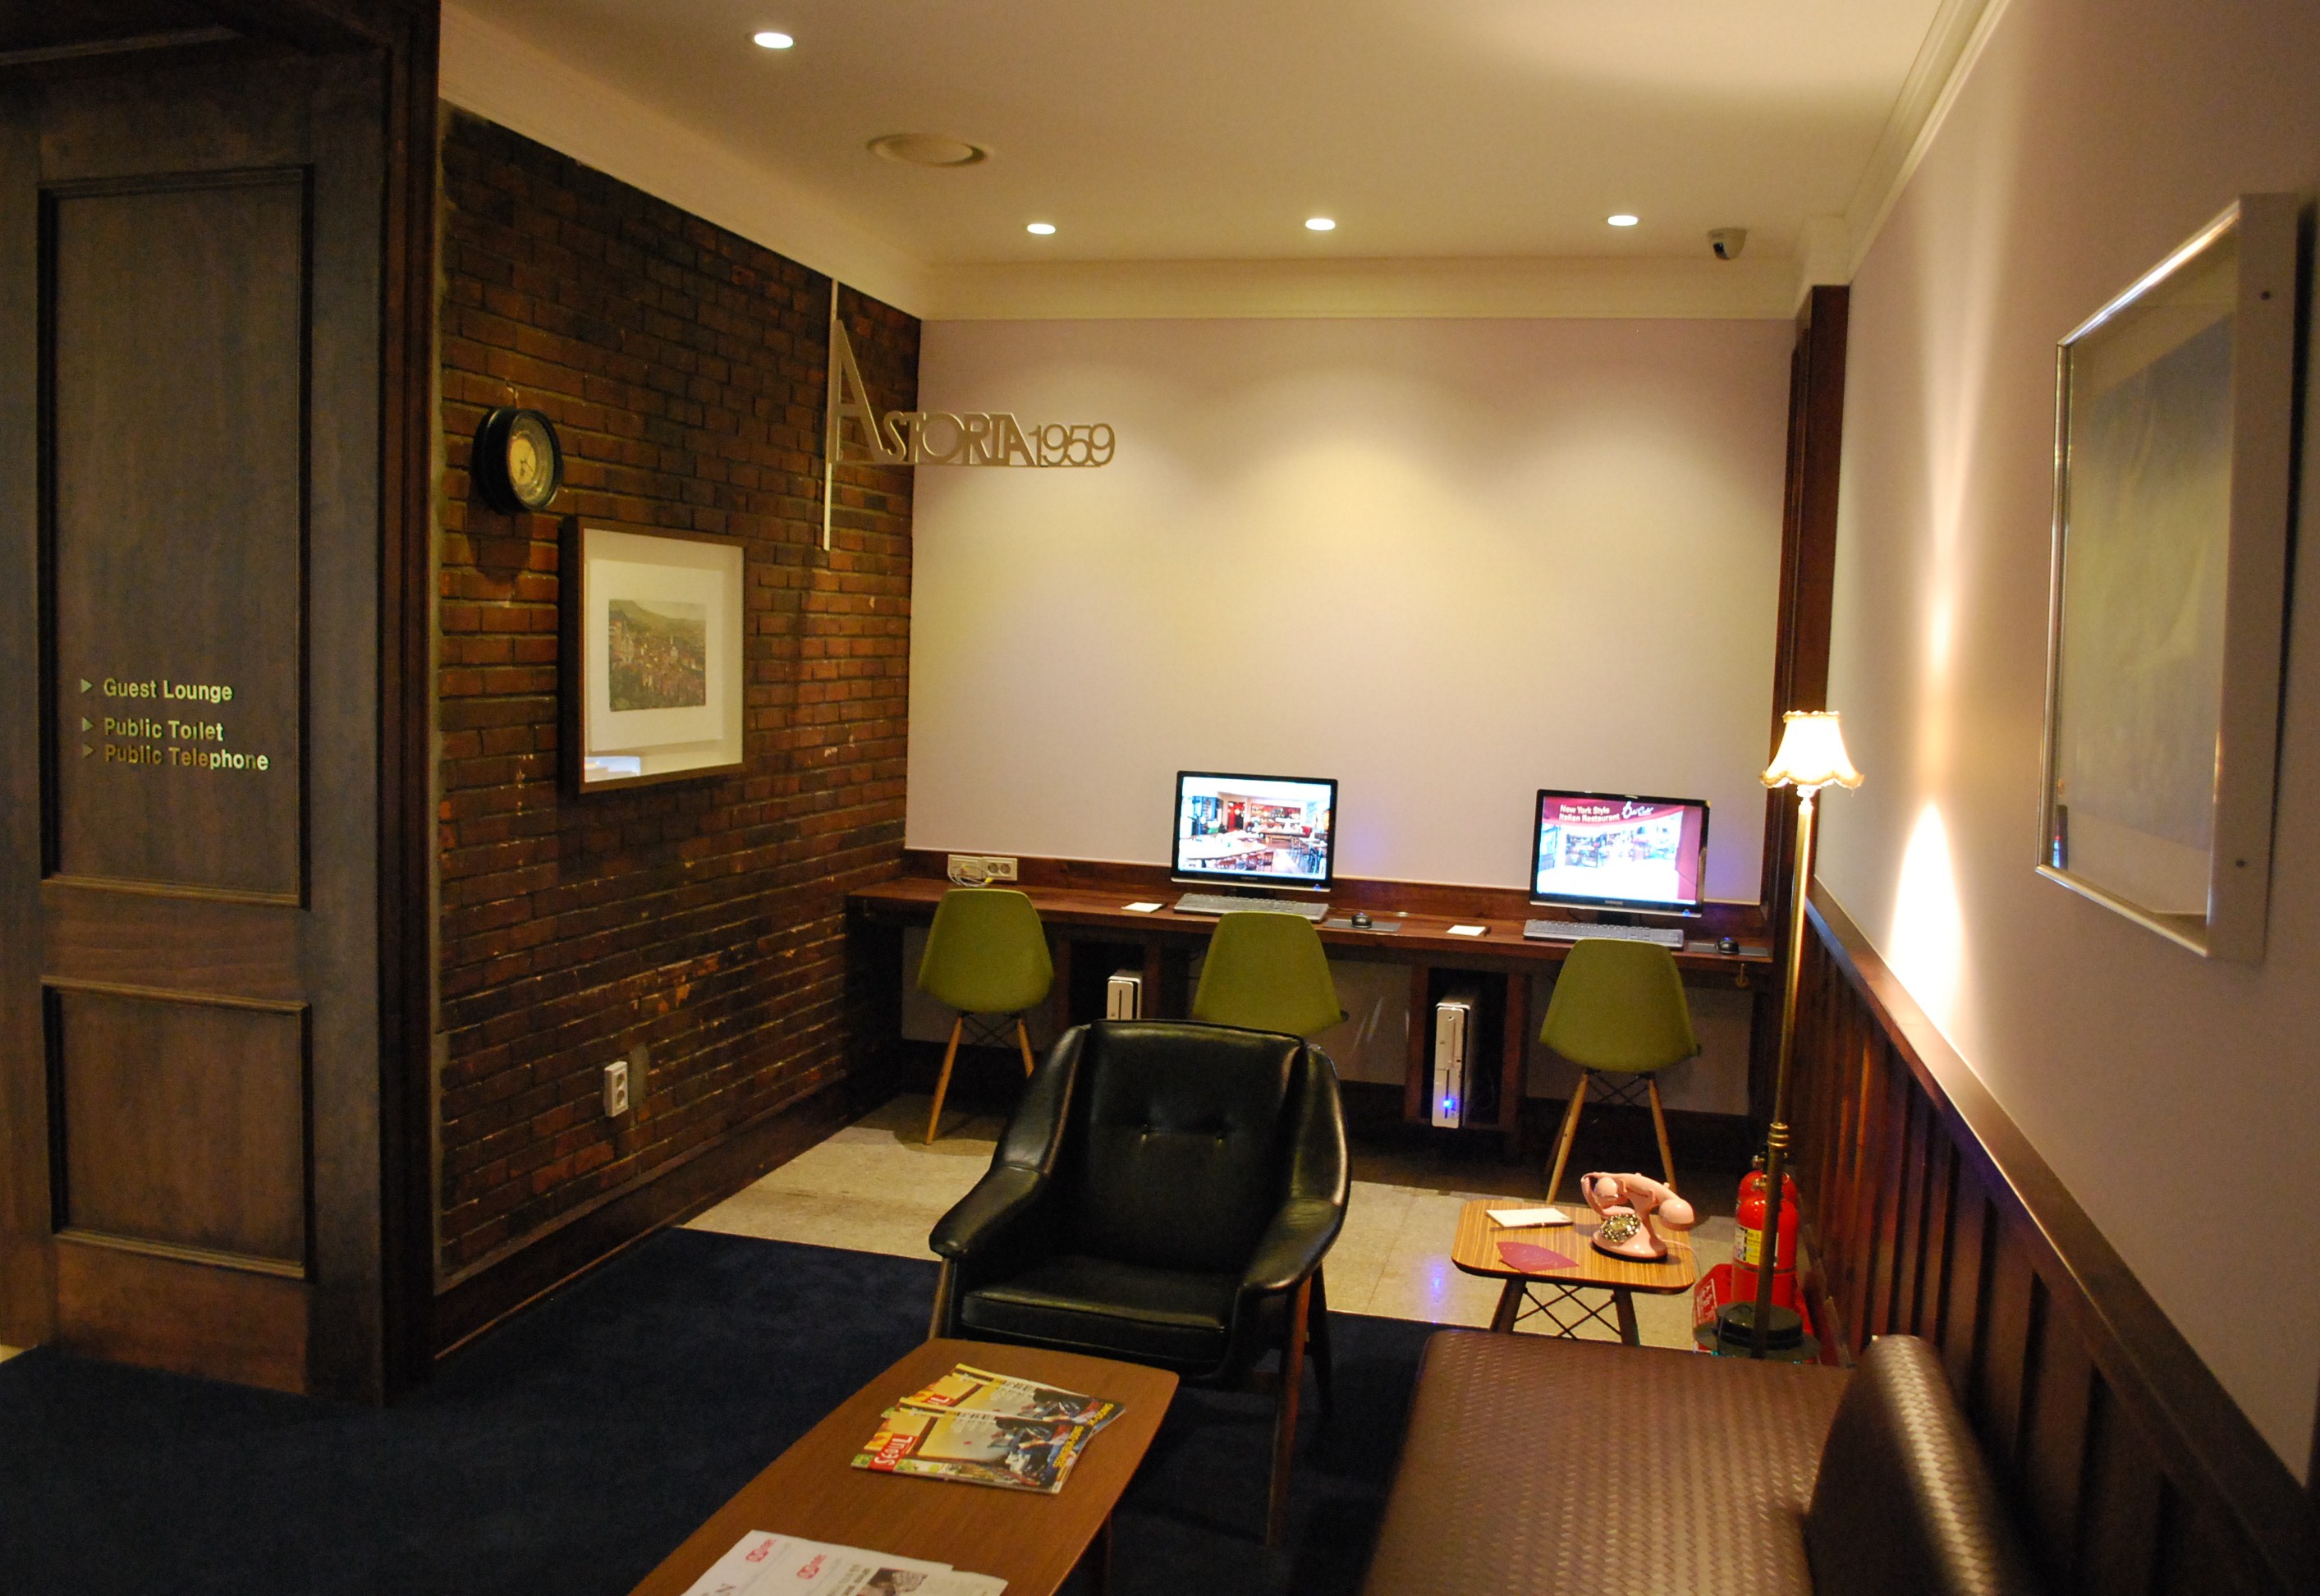 Astorial Hotel Guest Lounge (Seoul)